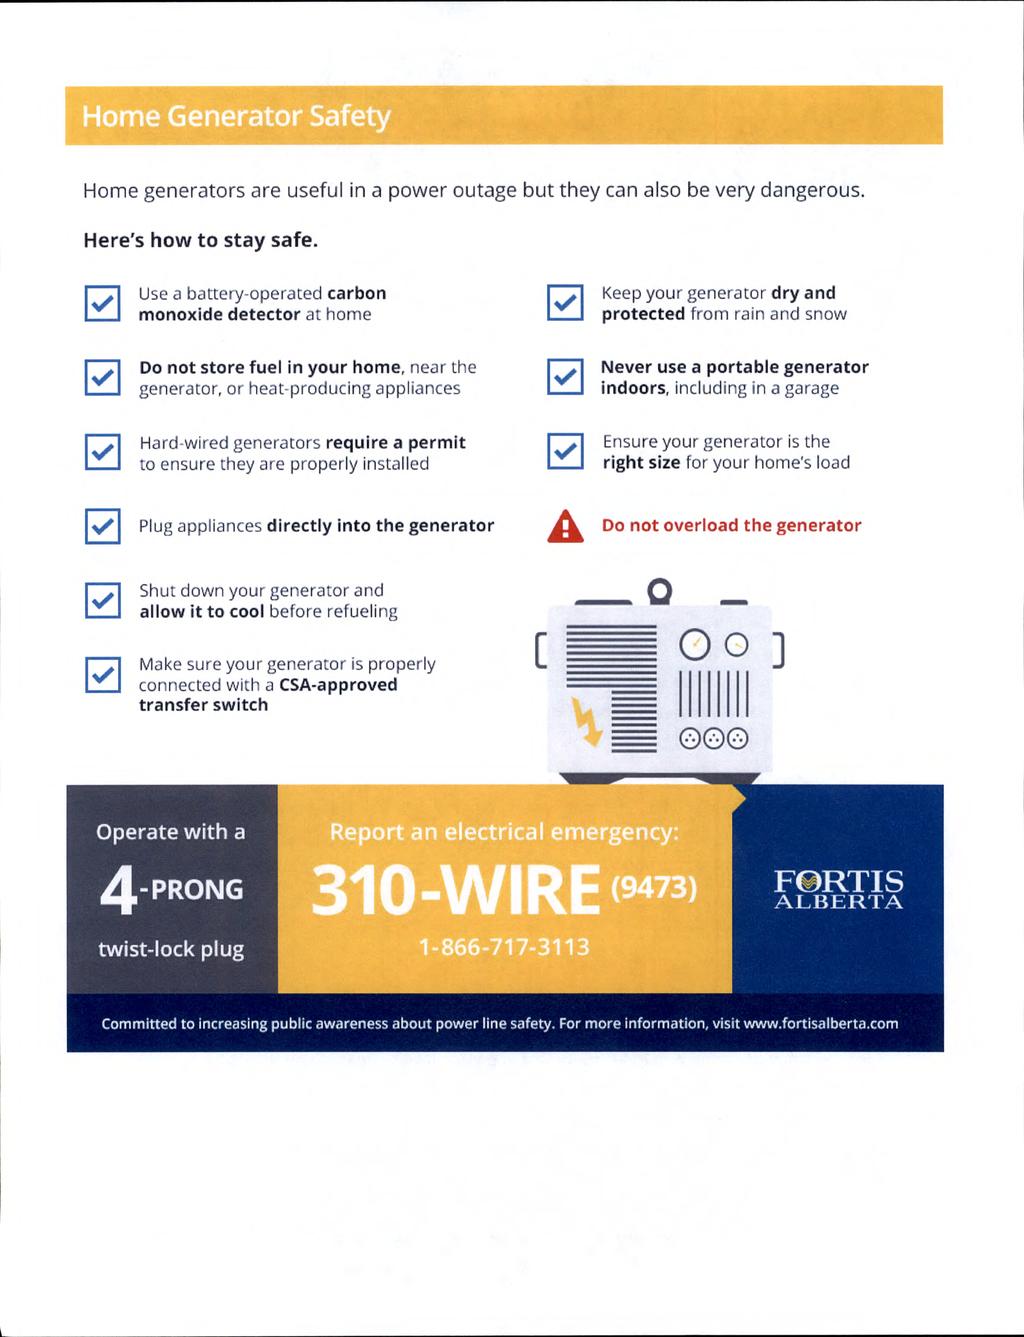 Home generators are useful in a power outage but they can also be very dangerous. Here's how to stay safe.